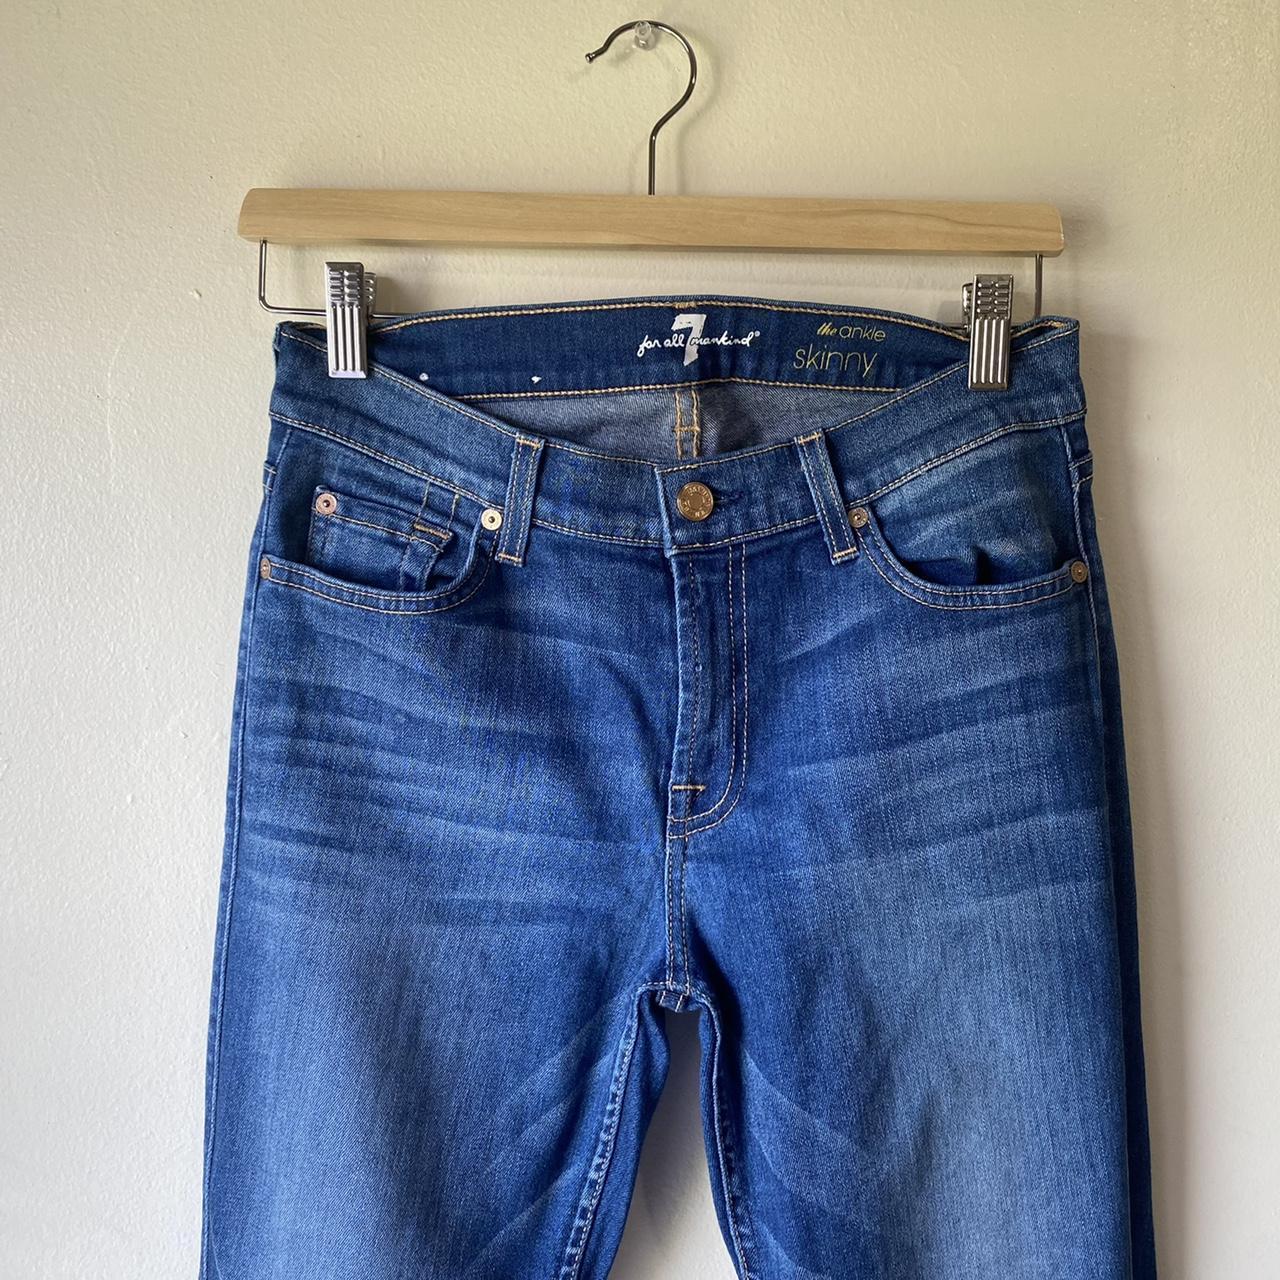 7 for All Mankind the Ankle Skinny Jeans The Ankle... - Depop